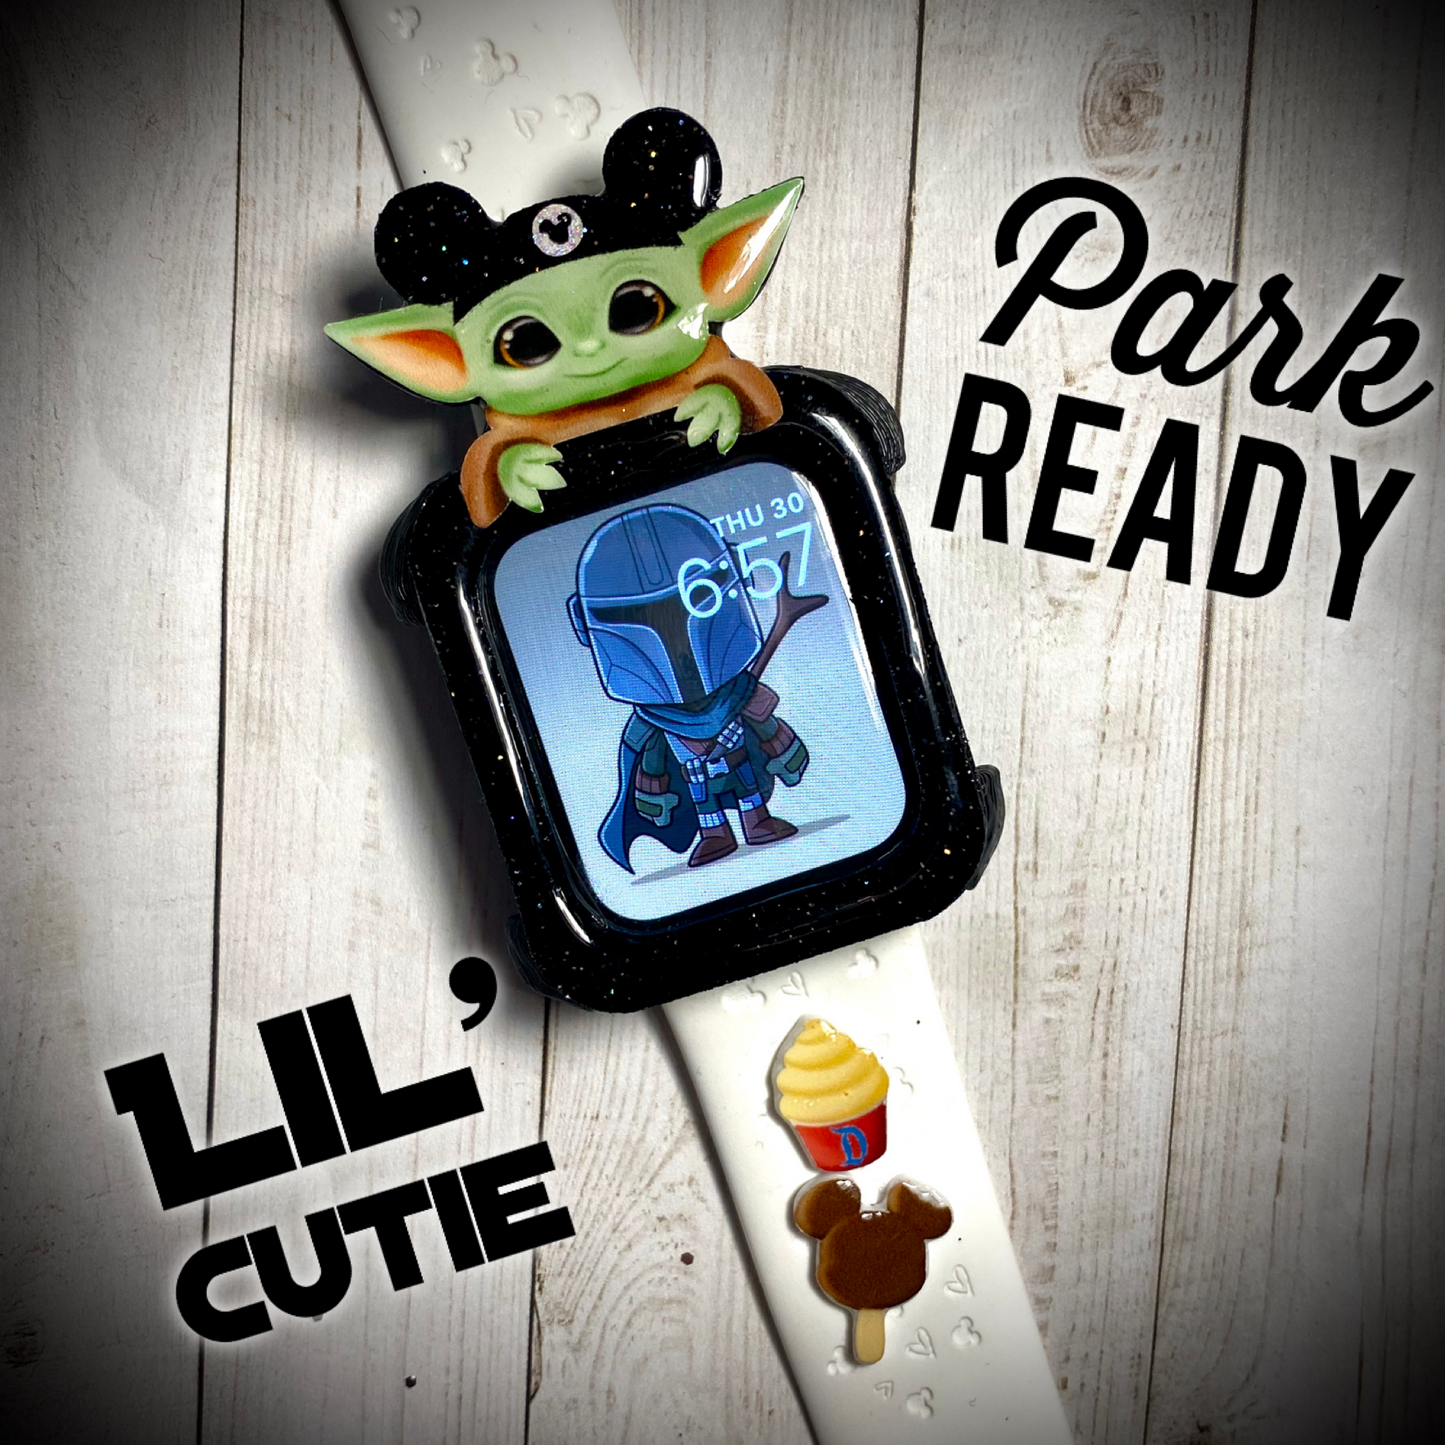 Park Ready Lil' Cutie Watch Cover